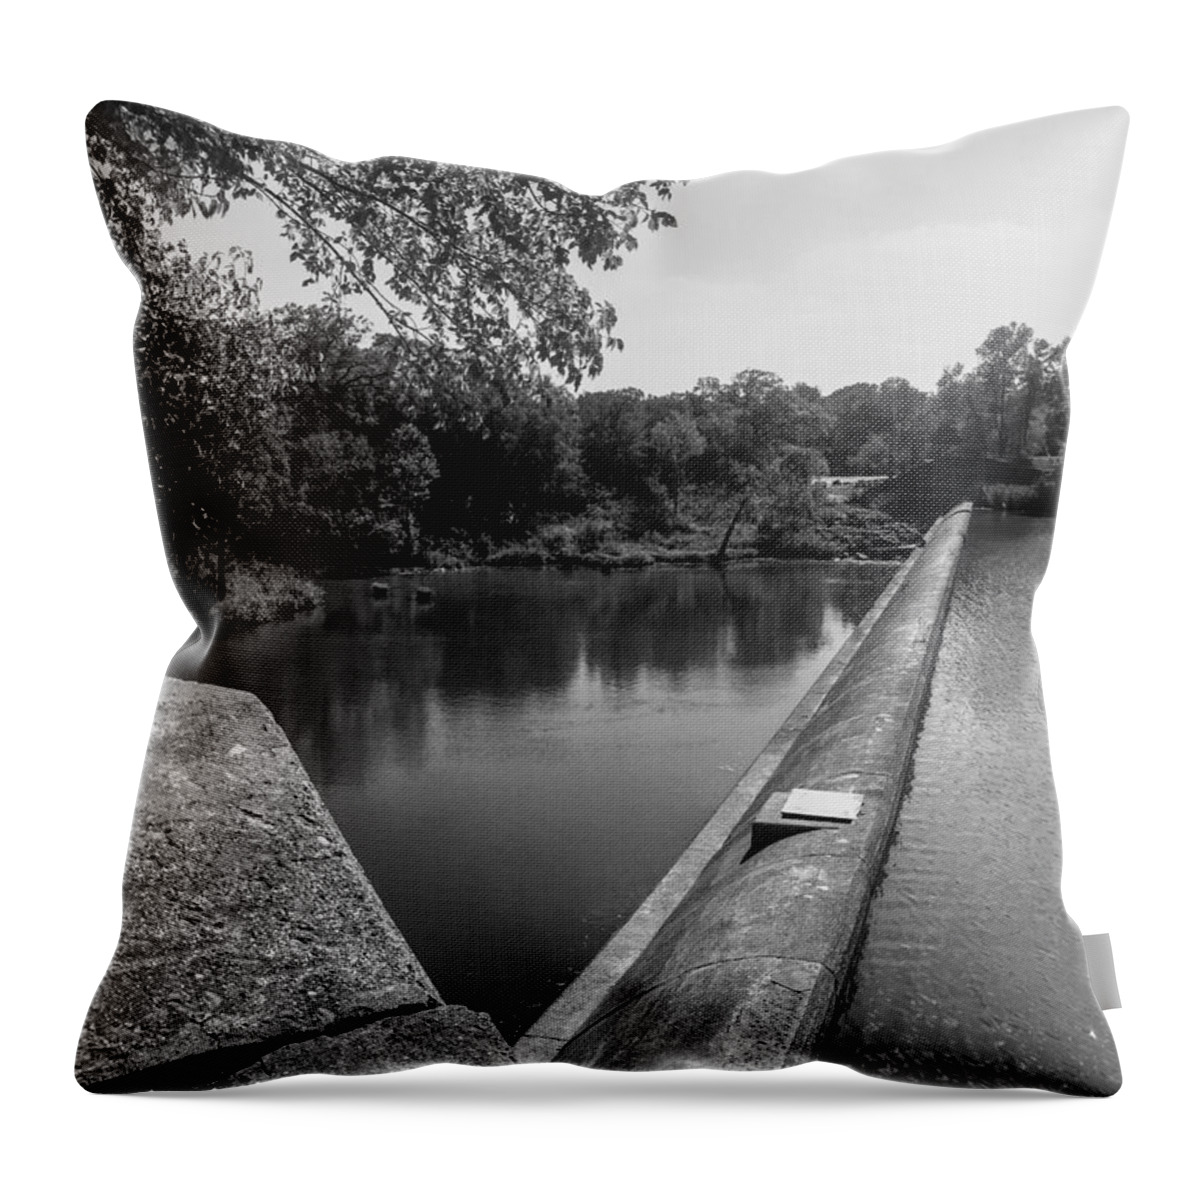 Black And White Throw Pillow featuring the photograph The Dam by Kelly Thackeray